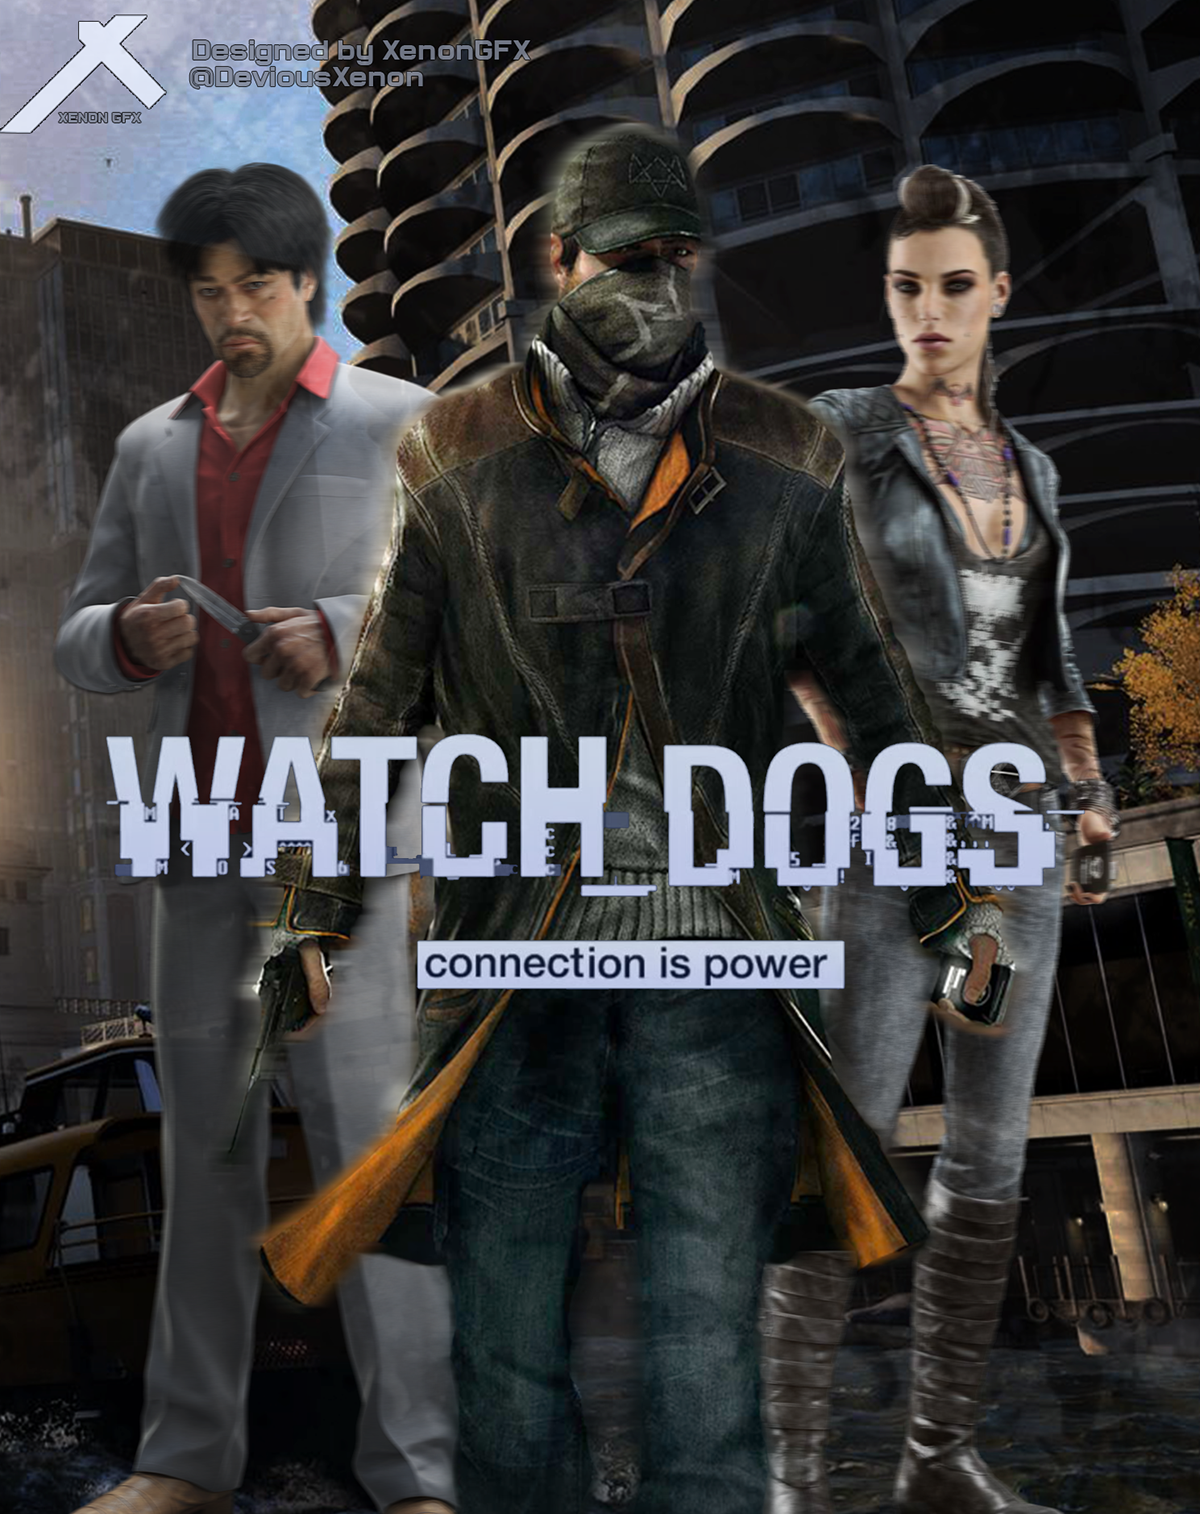 watch dogs watch dog dogs The Game game poster Boxart XBOX 360 gameconsole Gaming